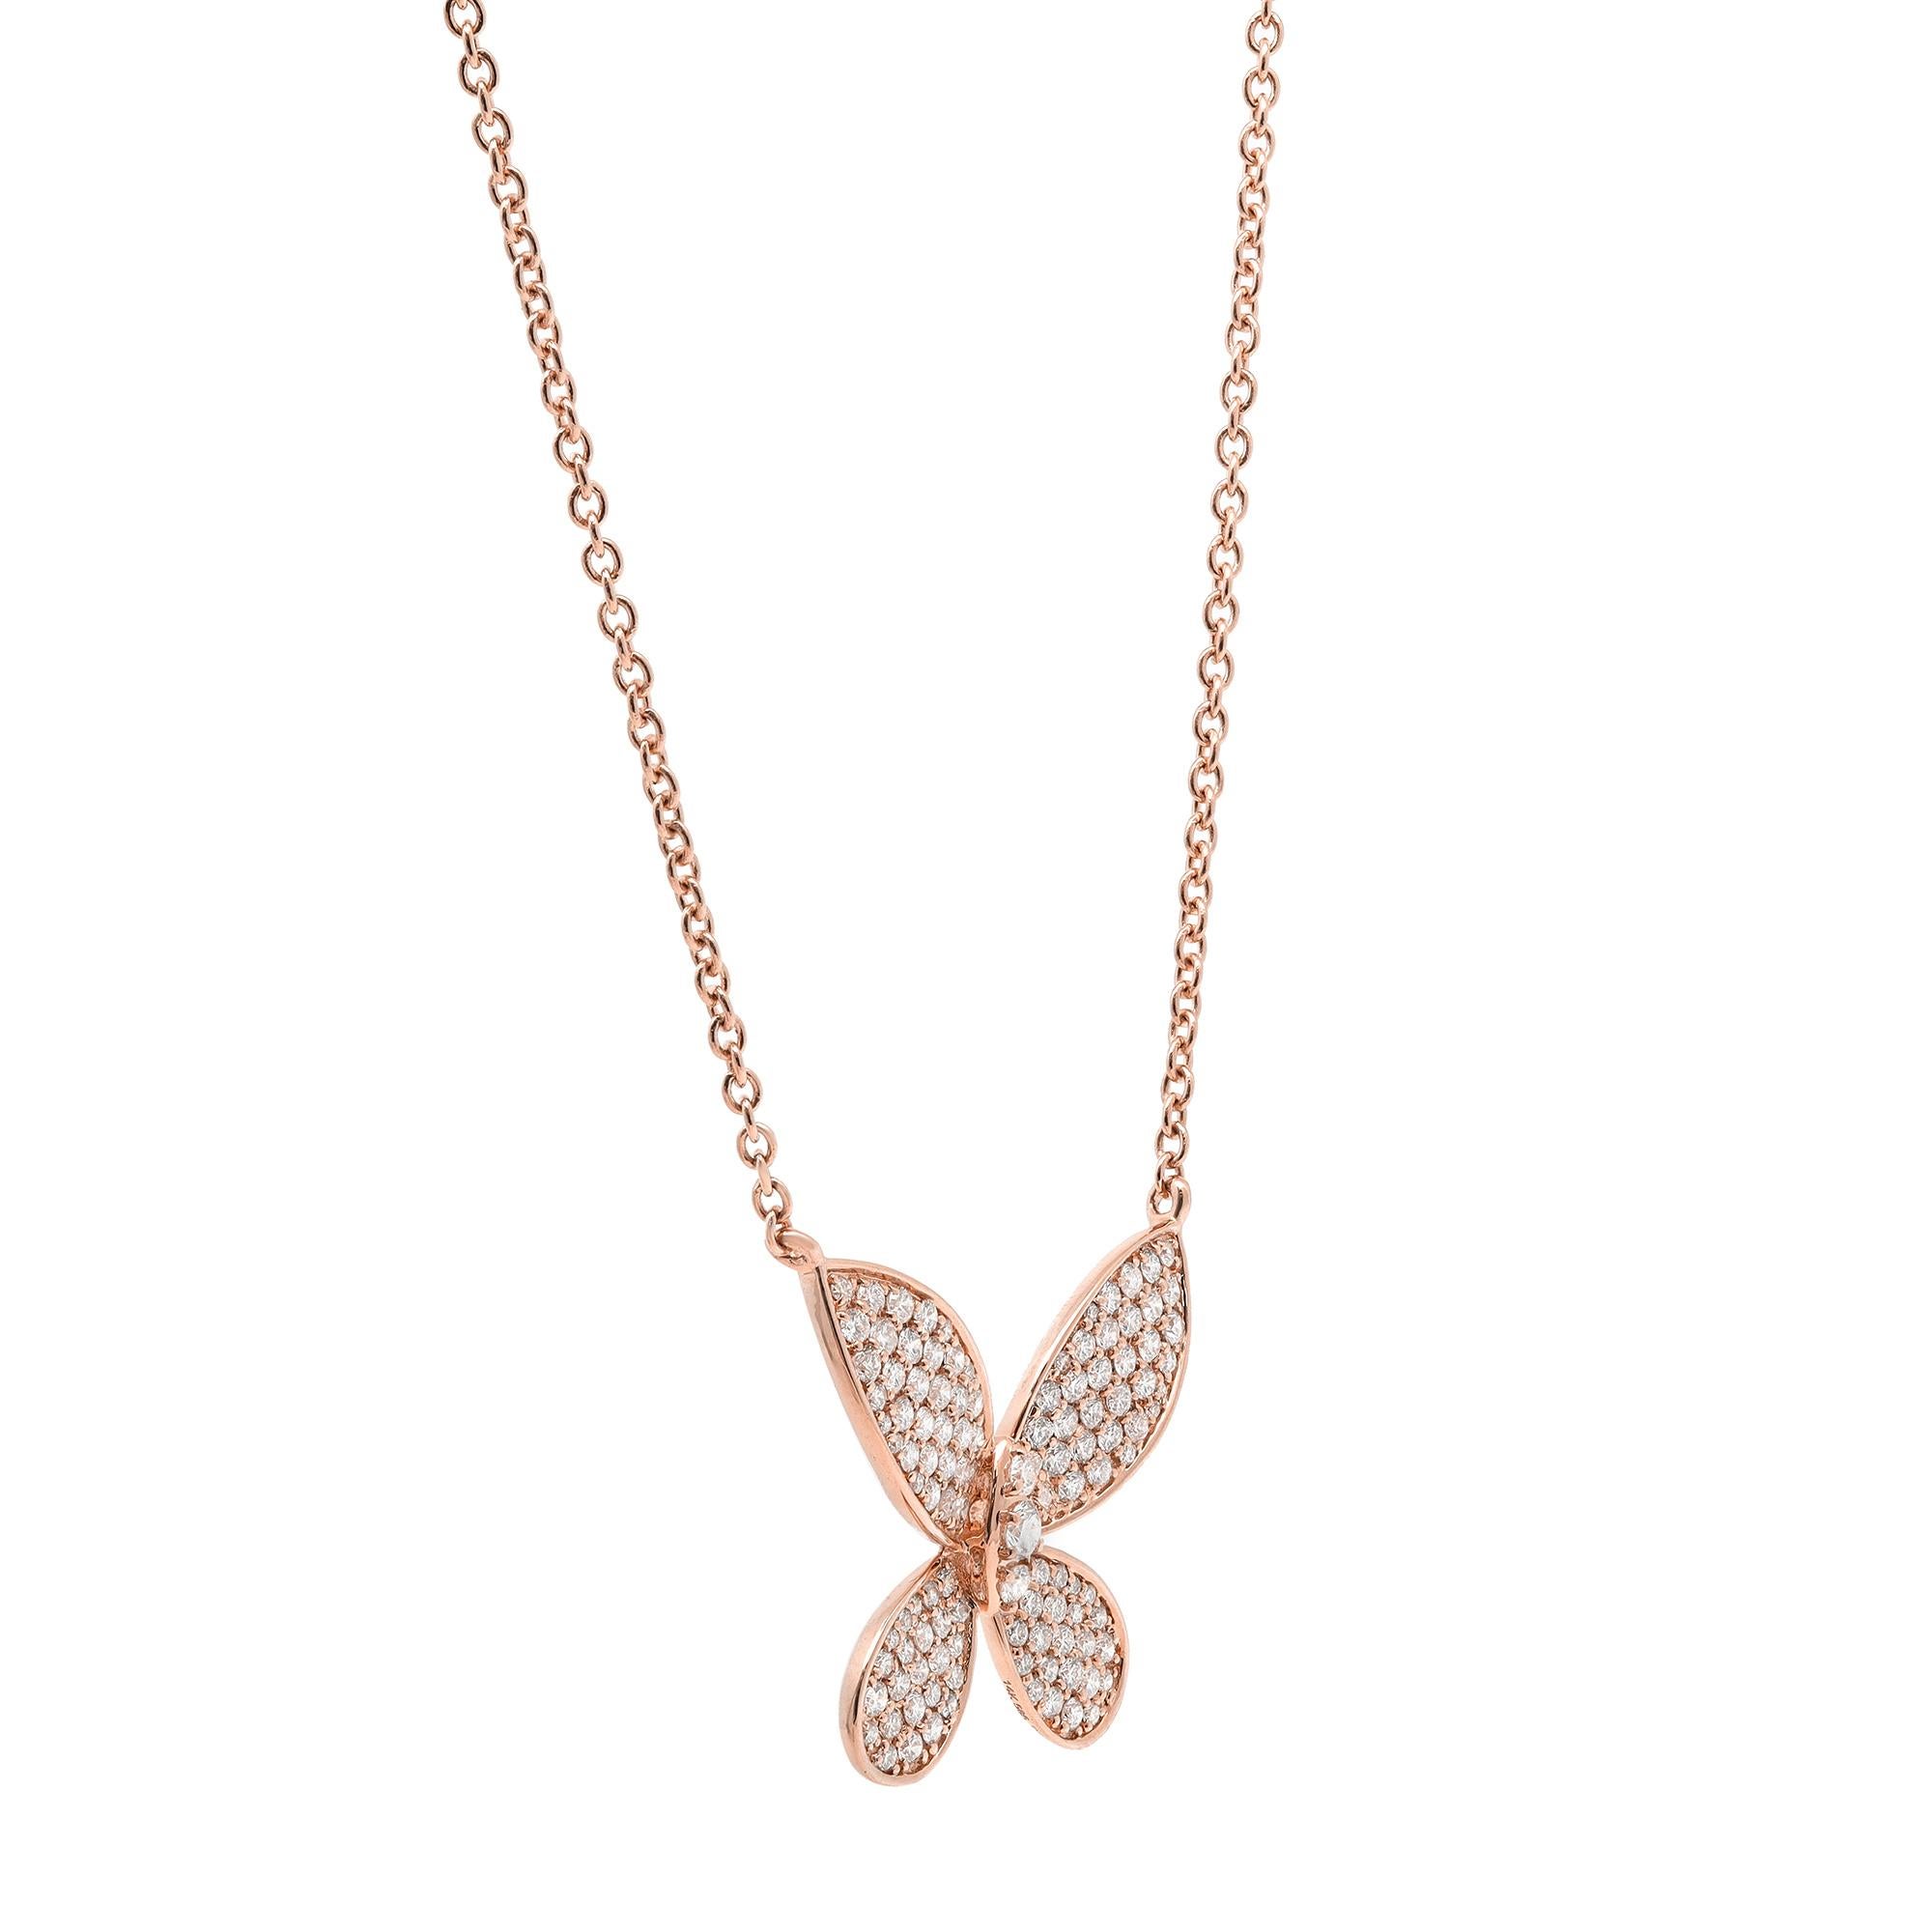 Charming and sweet, this diamond butterfly pendant necklace makes any day special. Crafted in 18k rose gold, it's stackable and perfect for everyday wear. It features pave set round brilliant cut diamonds weighing 1.01 carats. Diamond quality: G-H